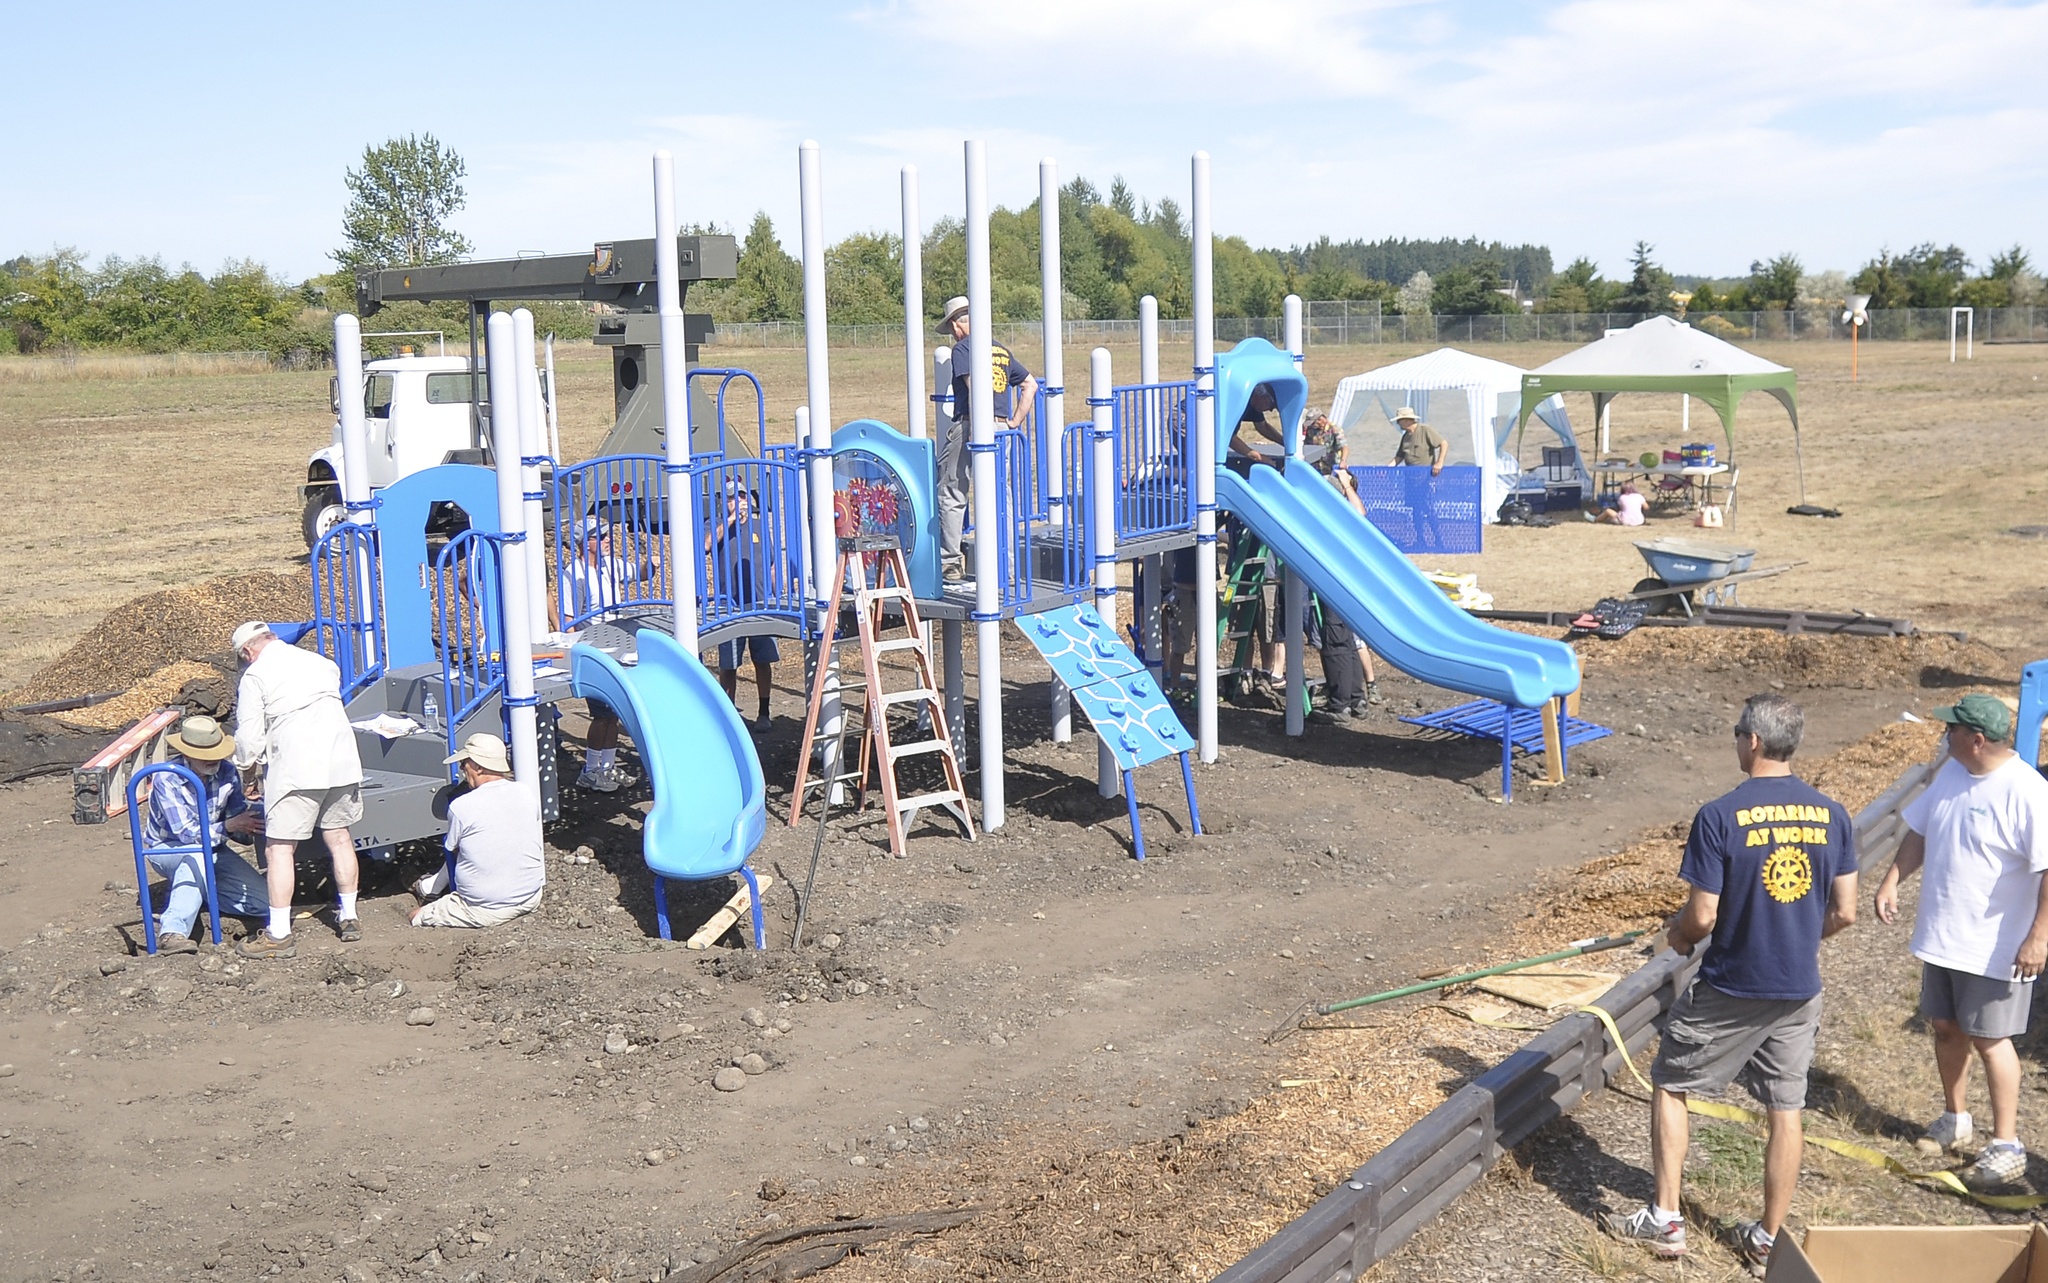 Community members come together to help construct playground equipment at Greywolf Elementary School in Carlsborg. Sequim Gazette photo by Michael Dashiell